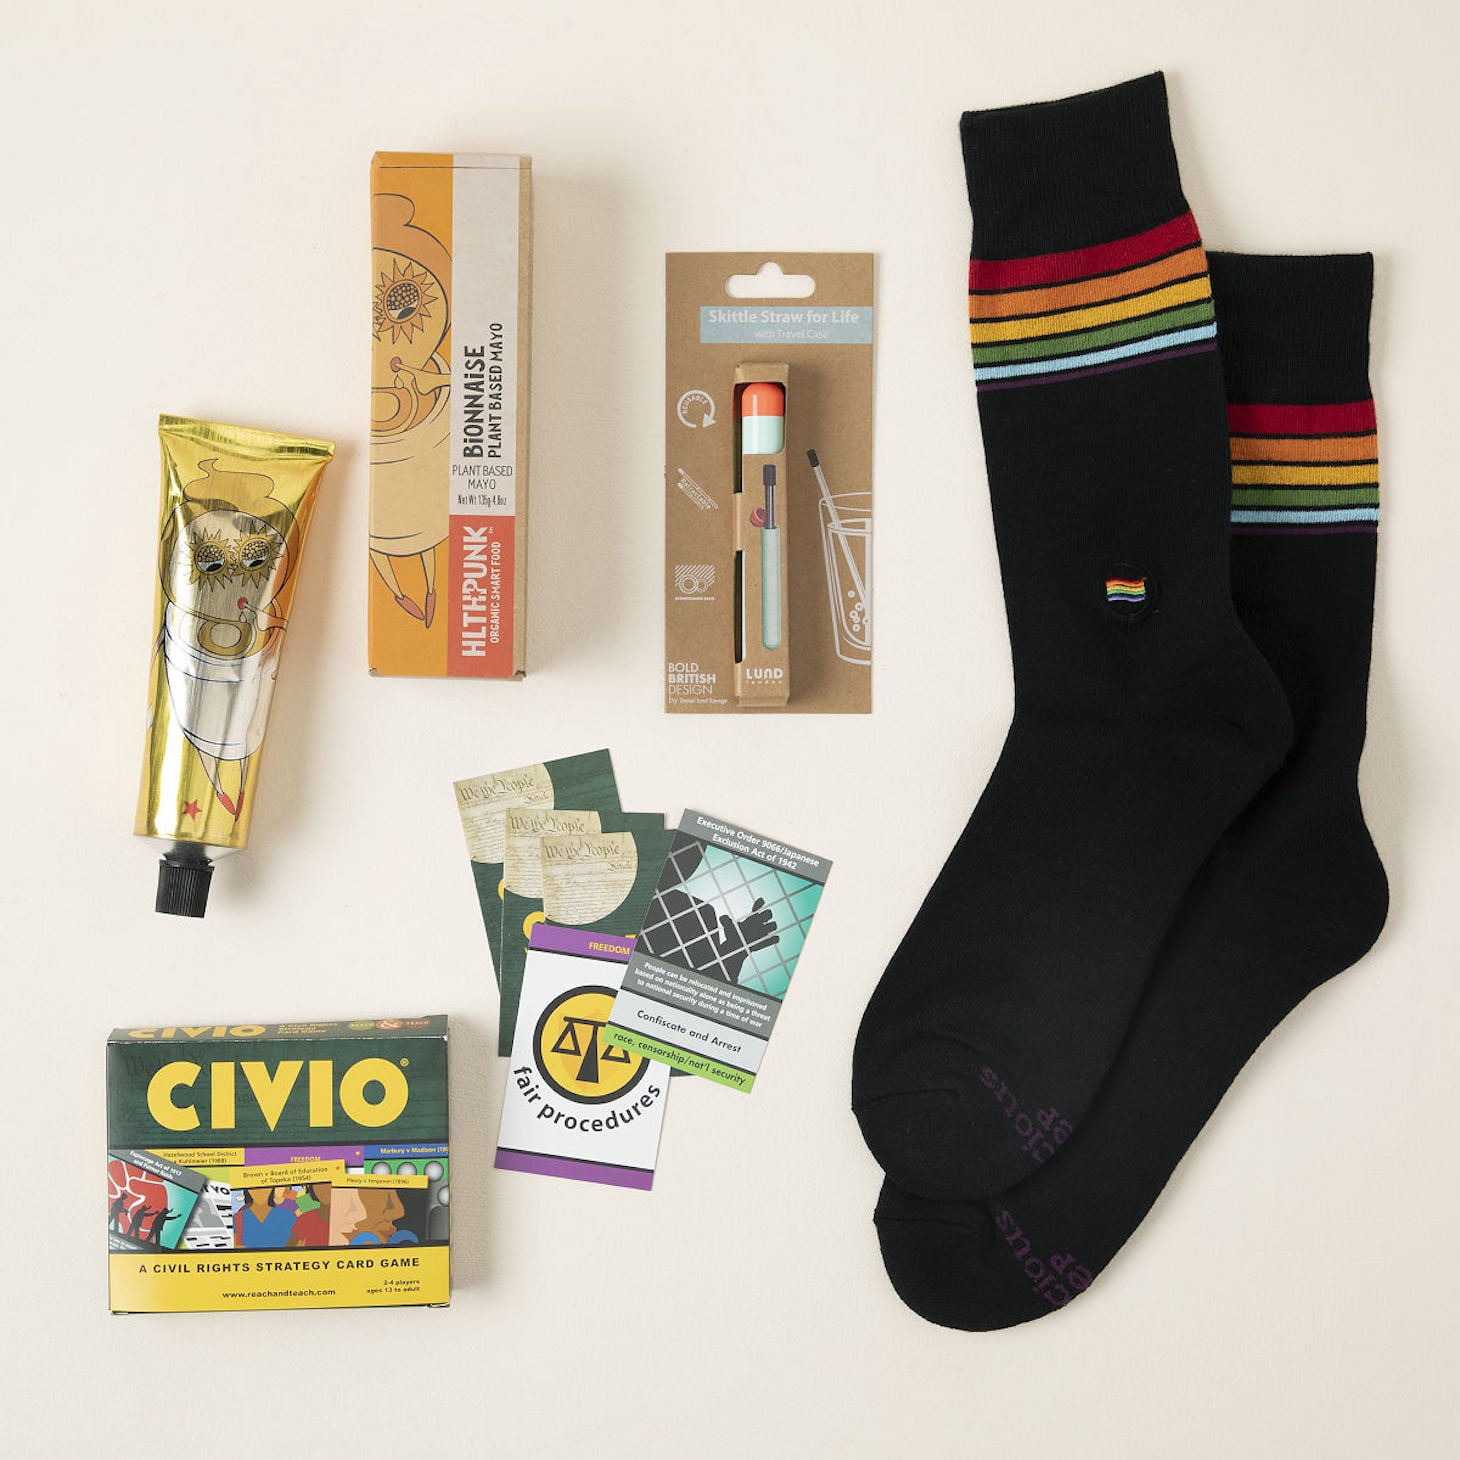 The Best Stocking Stuffers For College Students